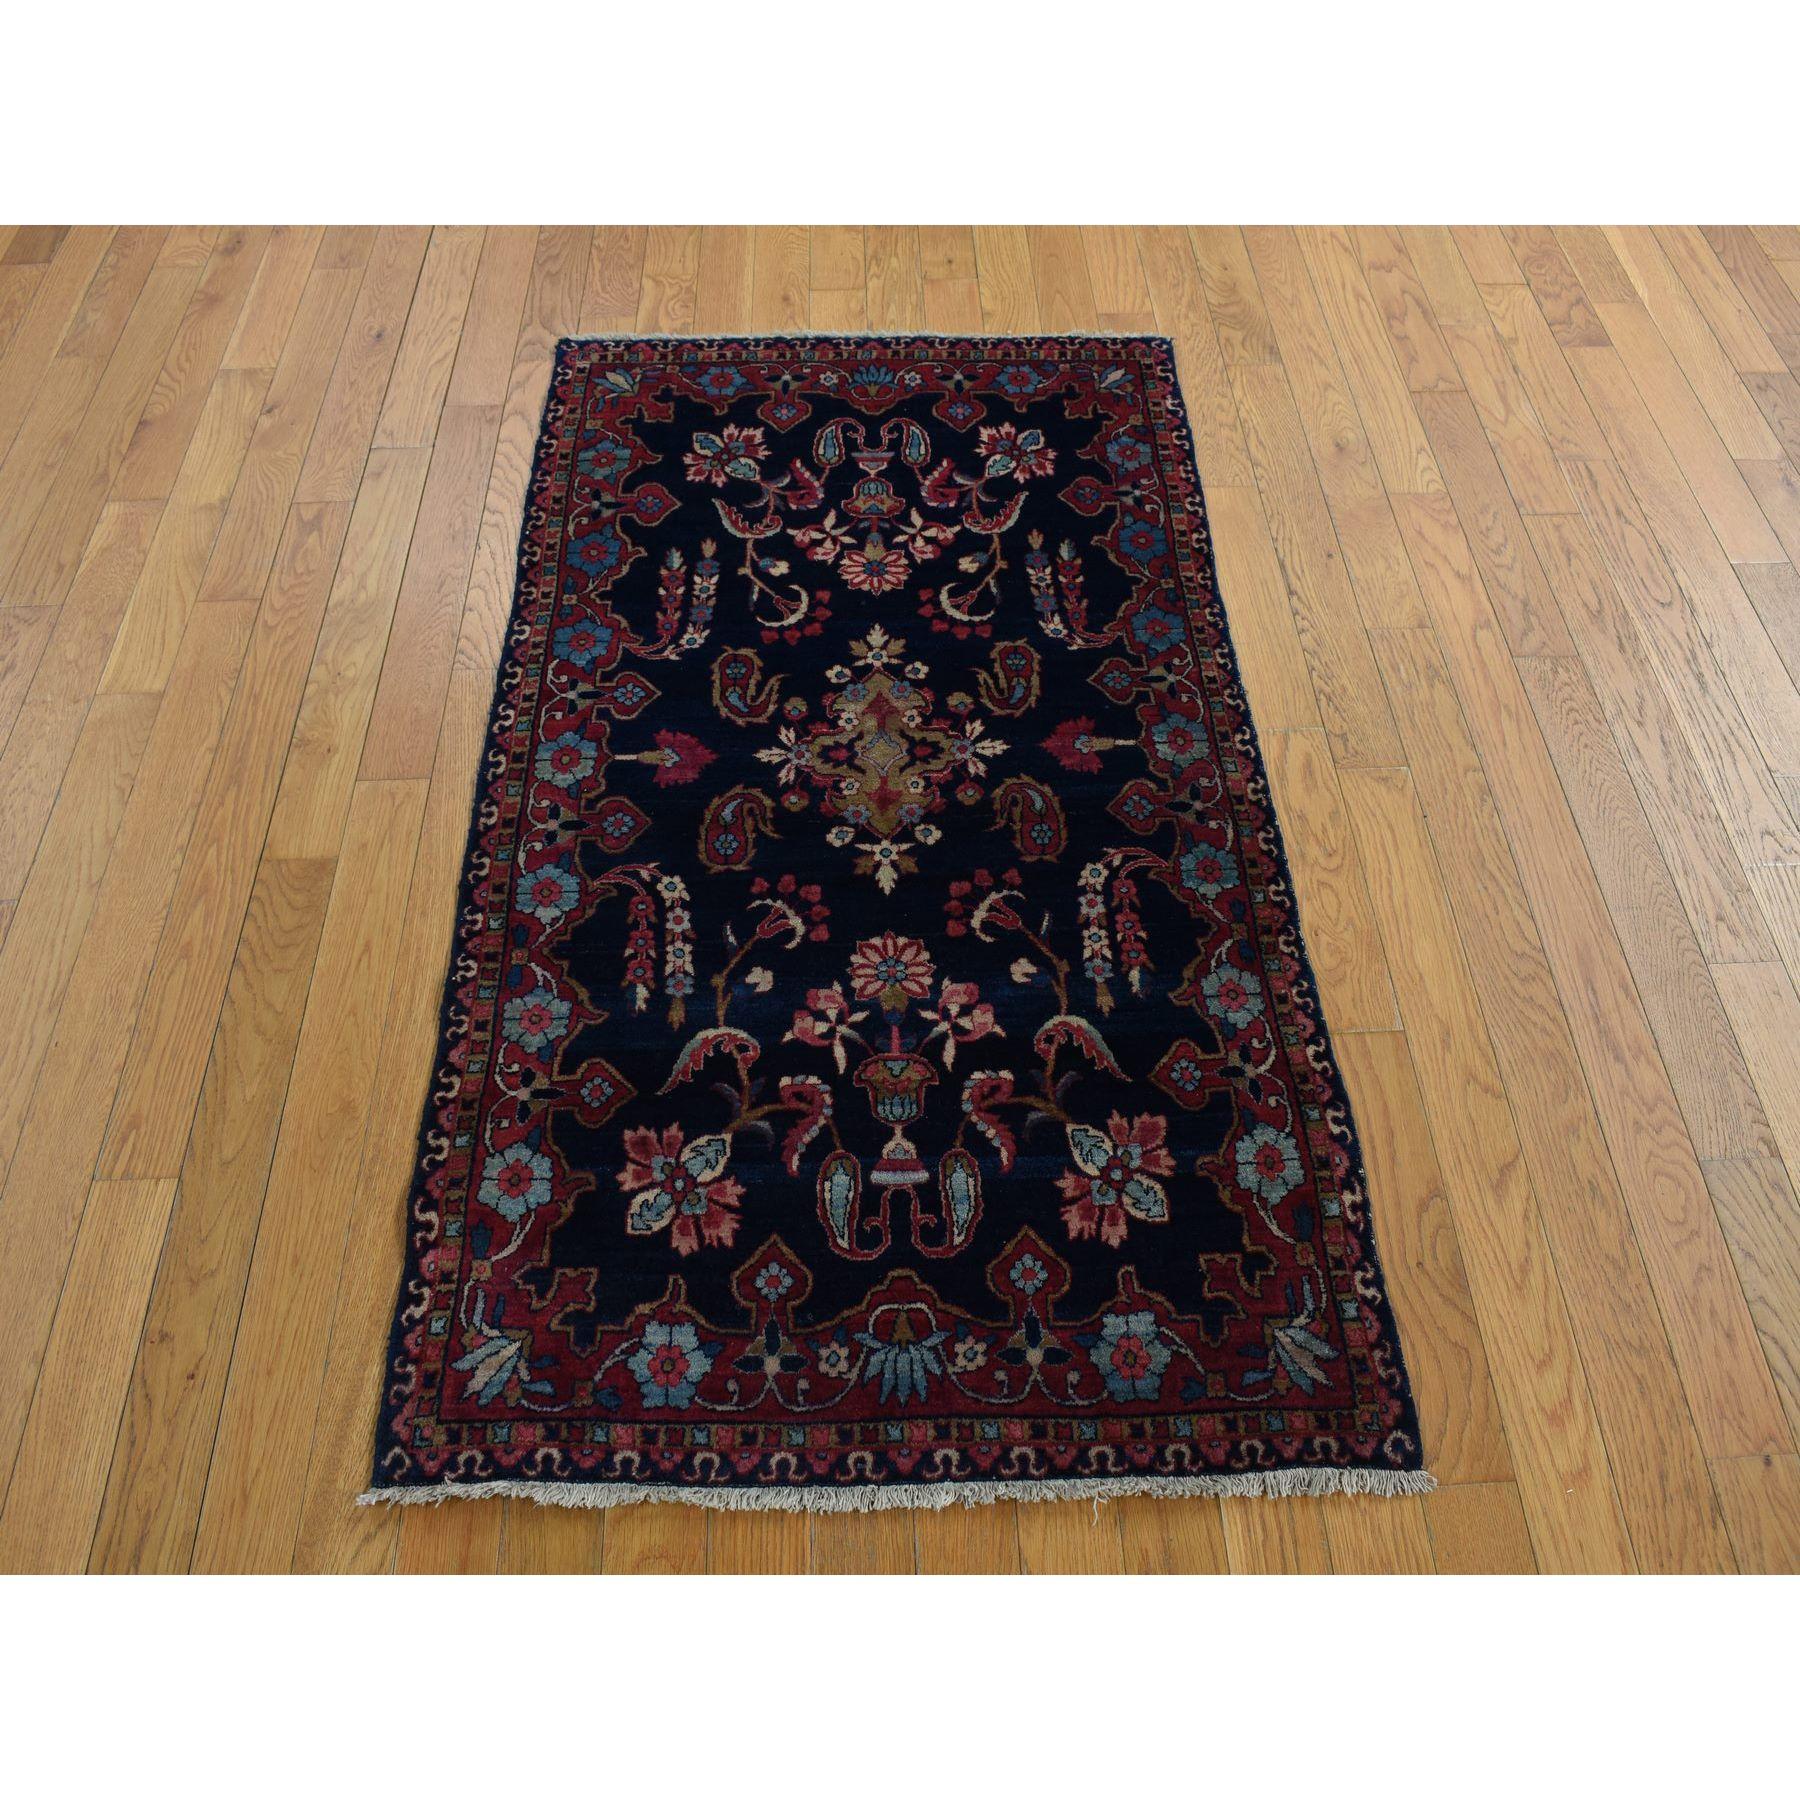 This fabulous Hand-Knotted carpet has been created and designed for extra strength and durability. This rug has been handcrafted for weeks in the traditional method that is used to make
Exact Rug Size in Feet and Inches : 2'10